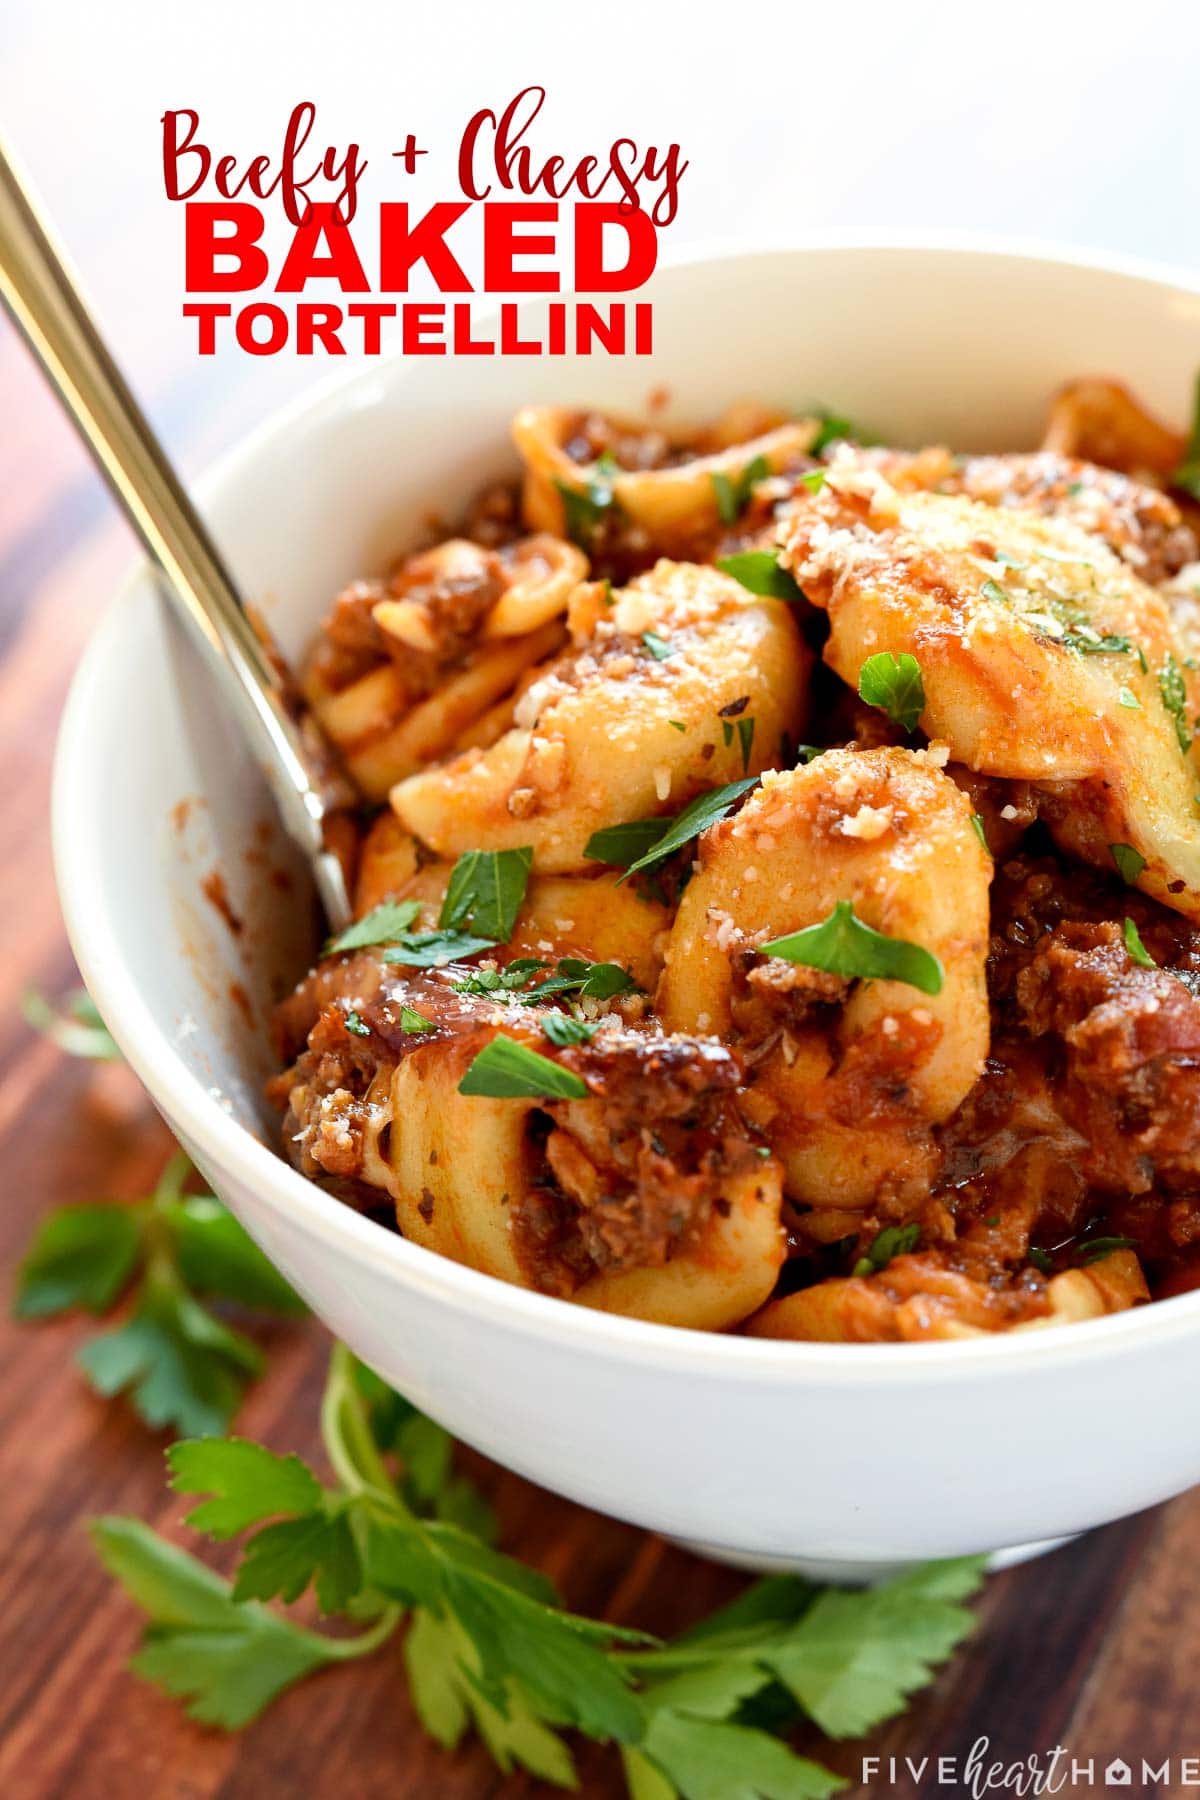 Beefy and cheesy Baked Tortellini with text overlay.